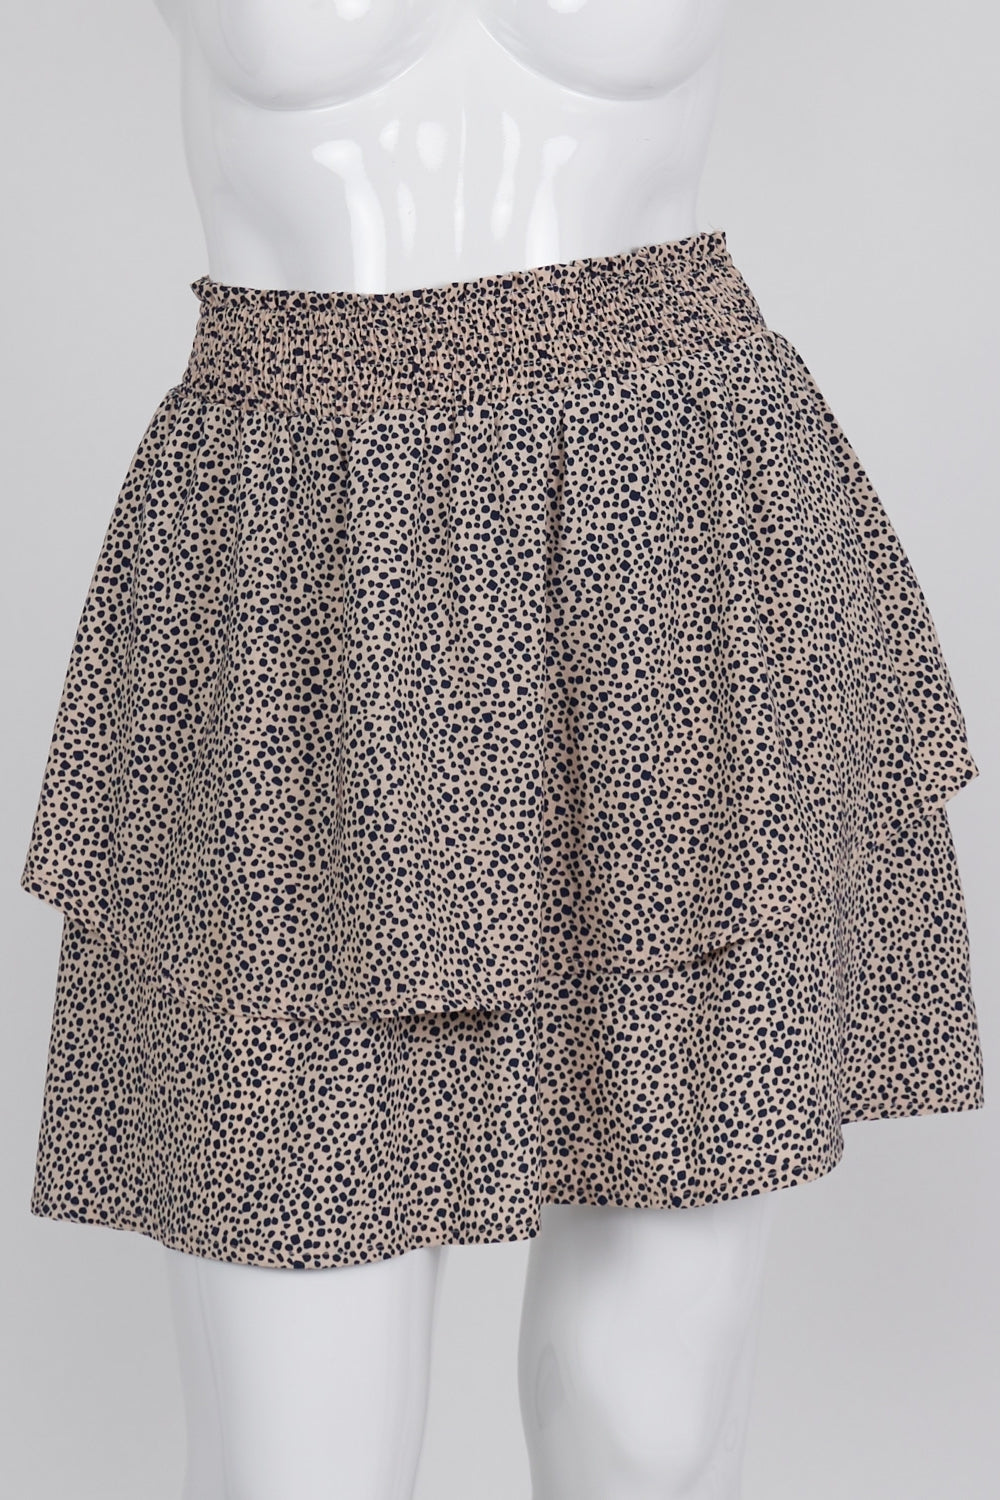 Grace & Co Pink Patterned Layered Skirt 12